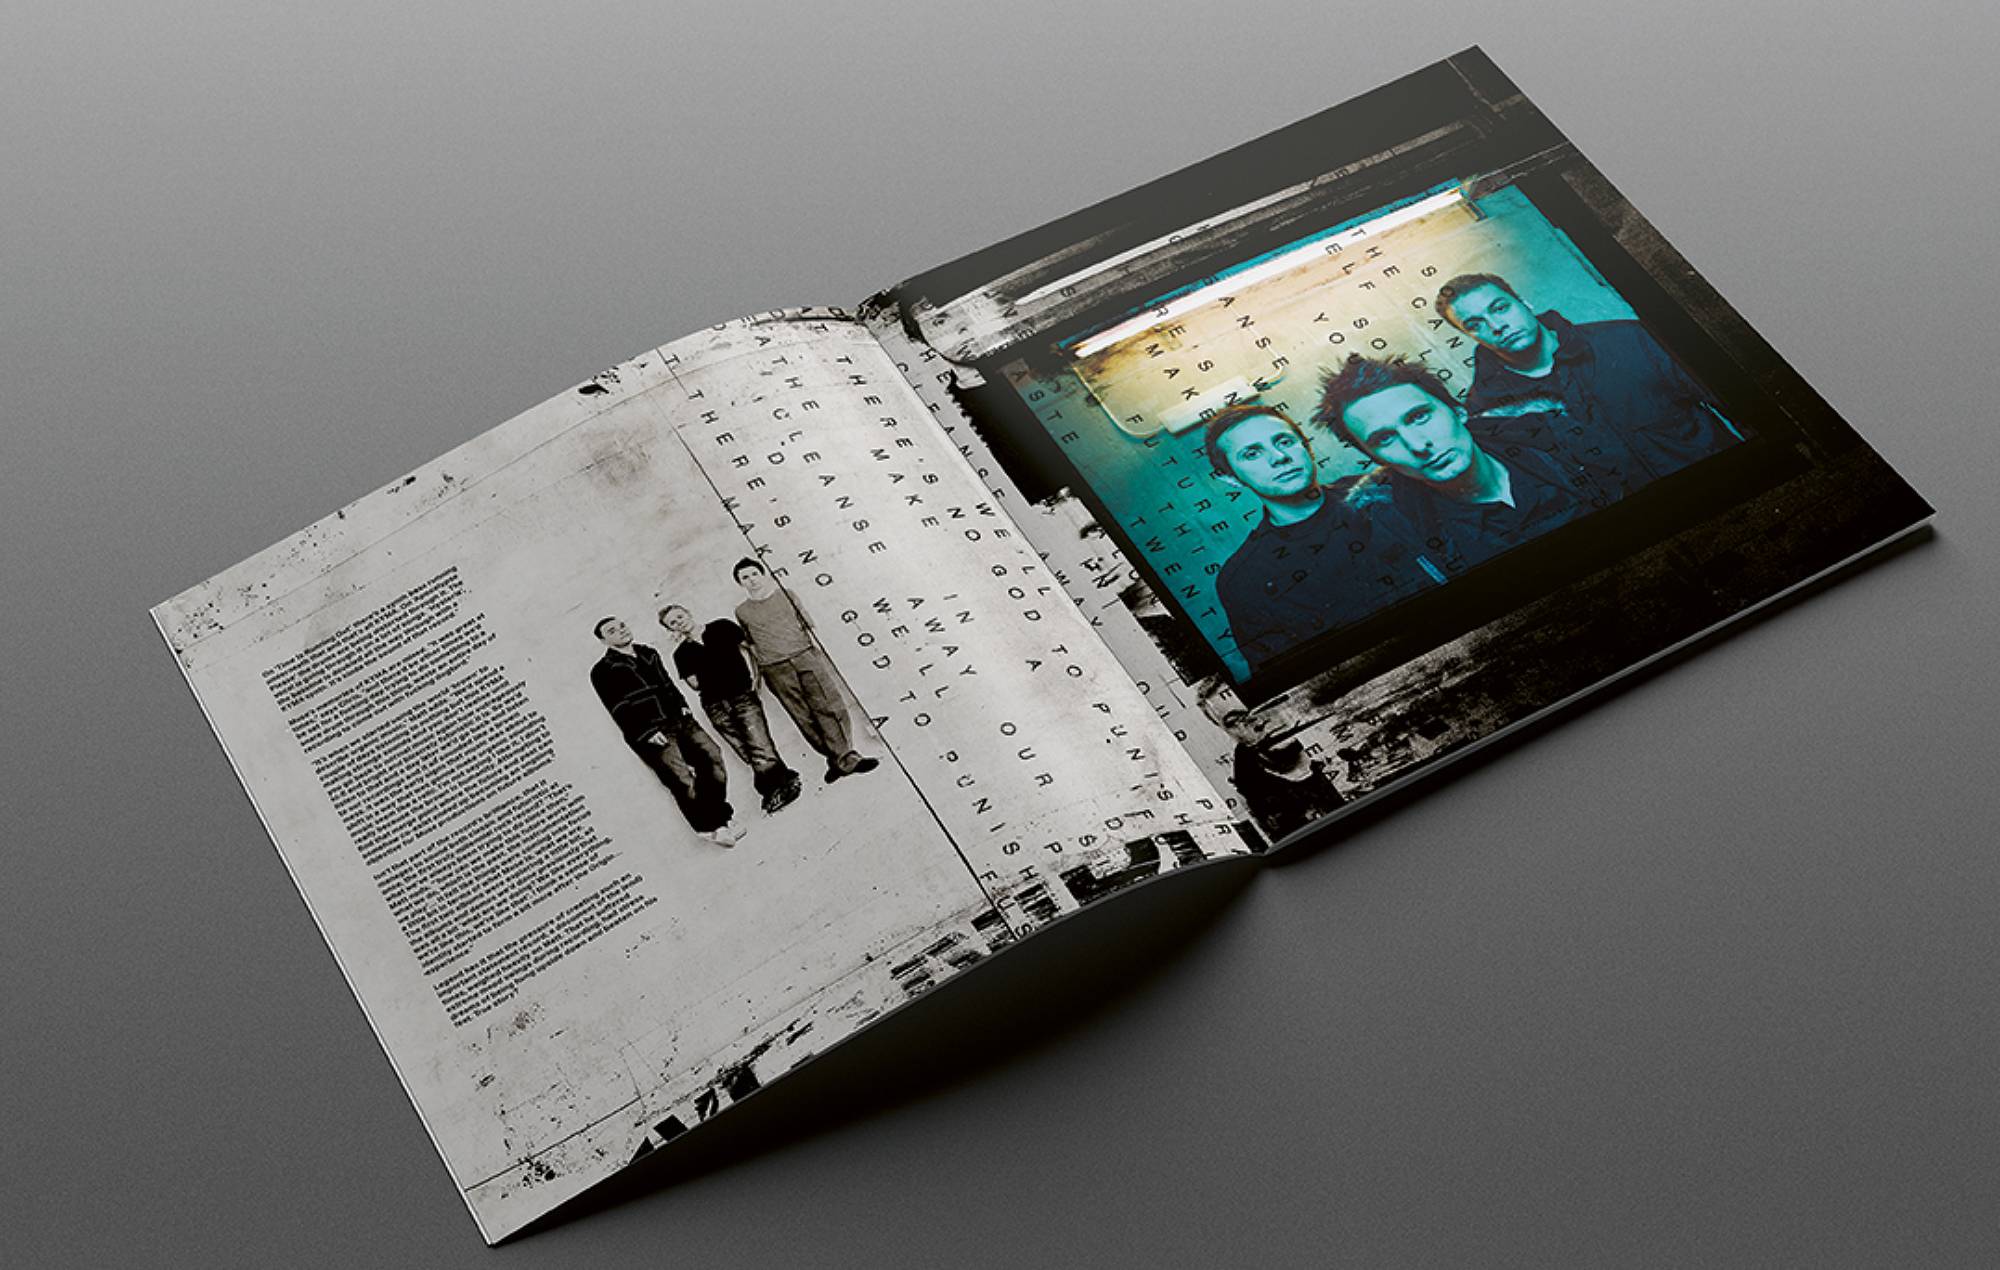 Muse have announced details of a 20th anniversary deluxe box set of their classic 2003 album 'Absolution'. Credit: Press